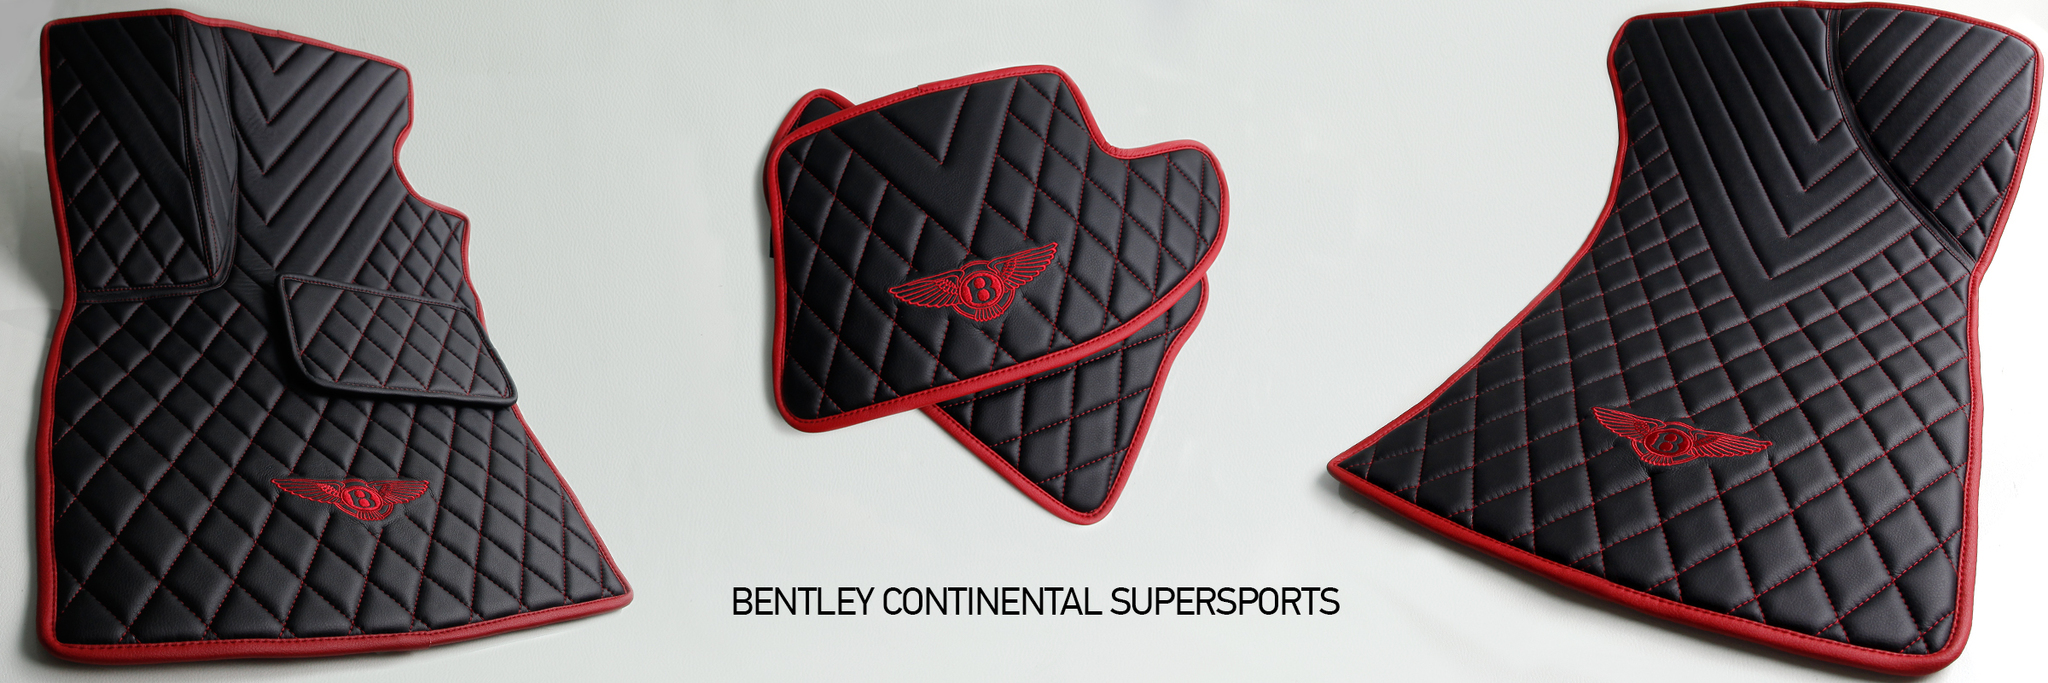 images-products-1-75-232988747-BENTLEY_CONTINENTAL_SUPERSPORTS.jpg